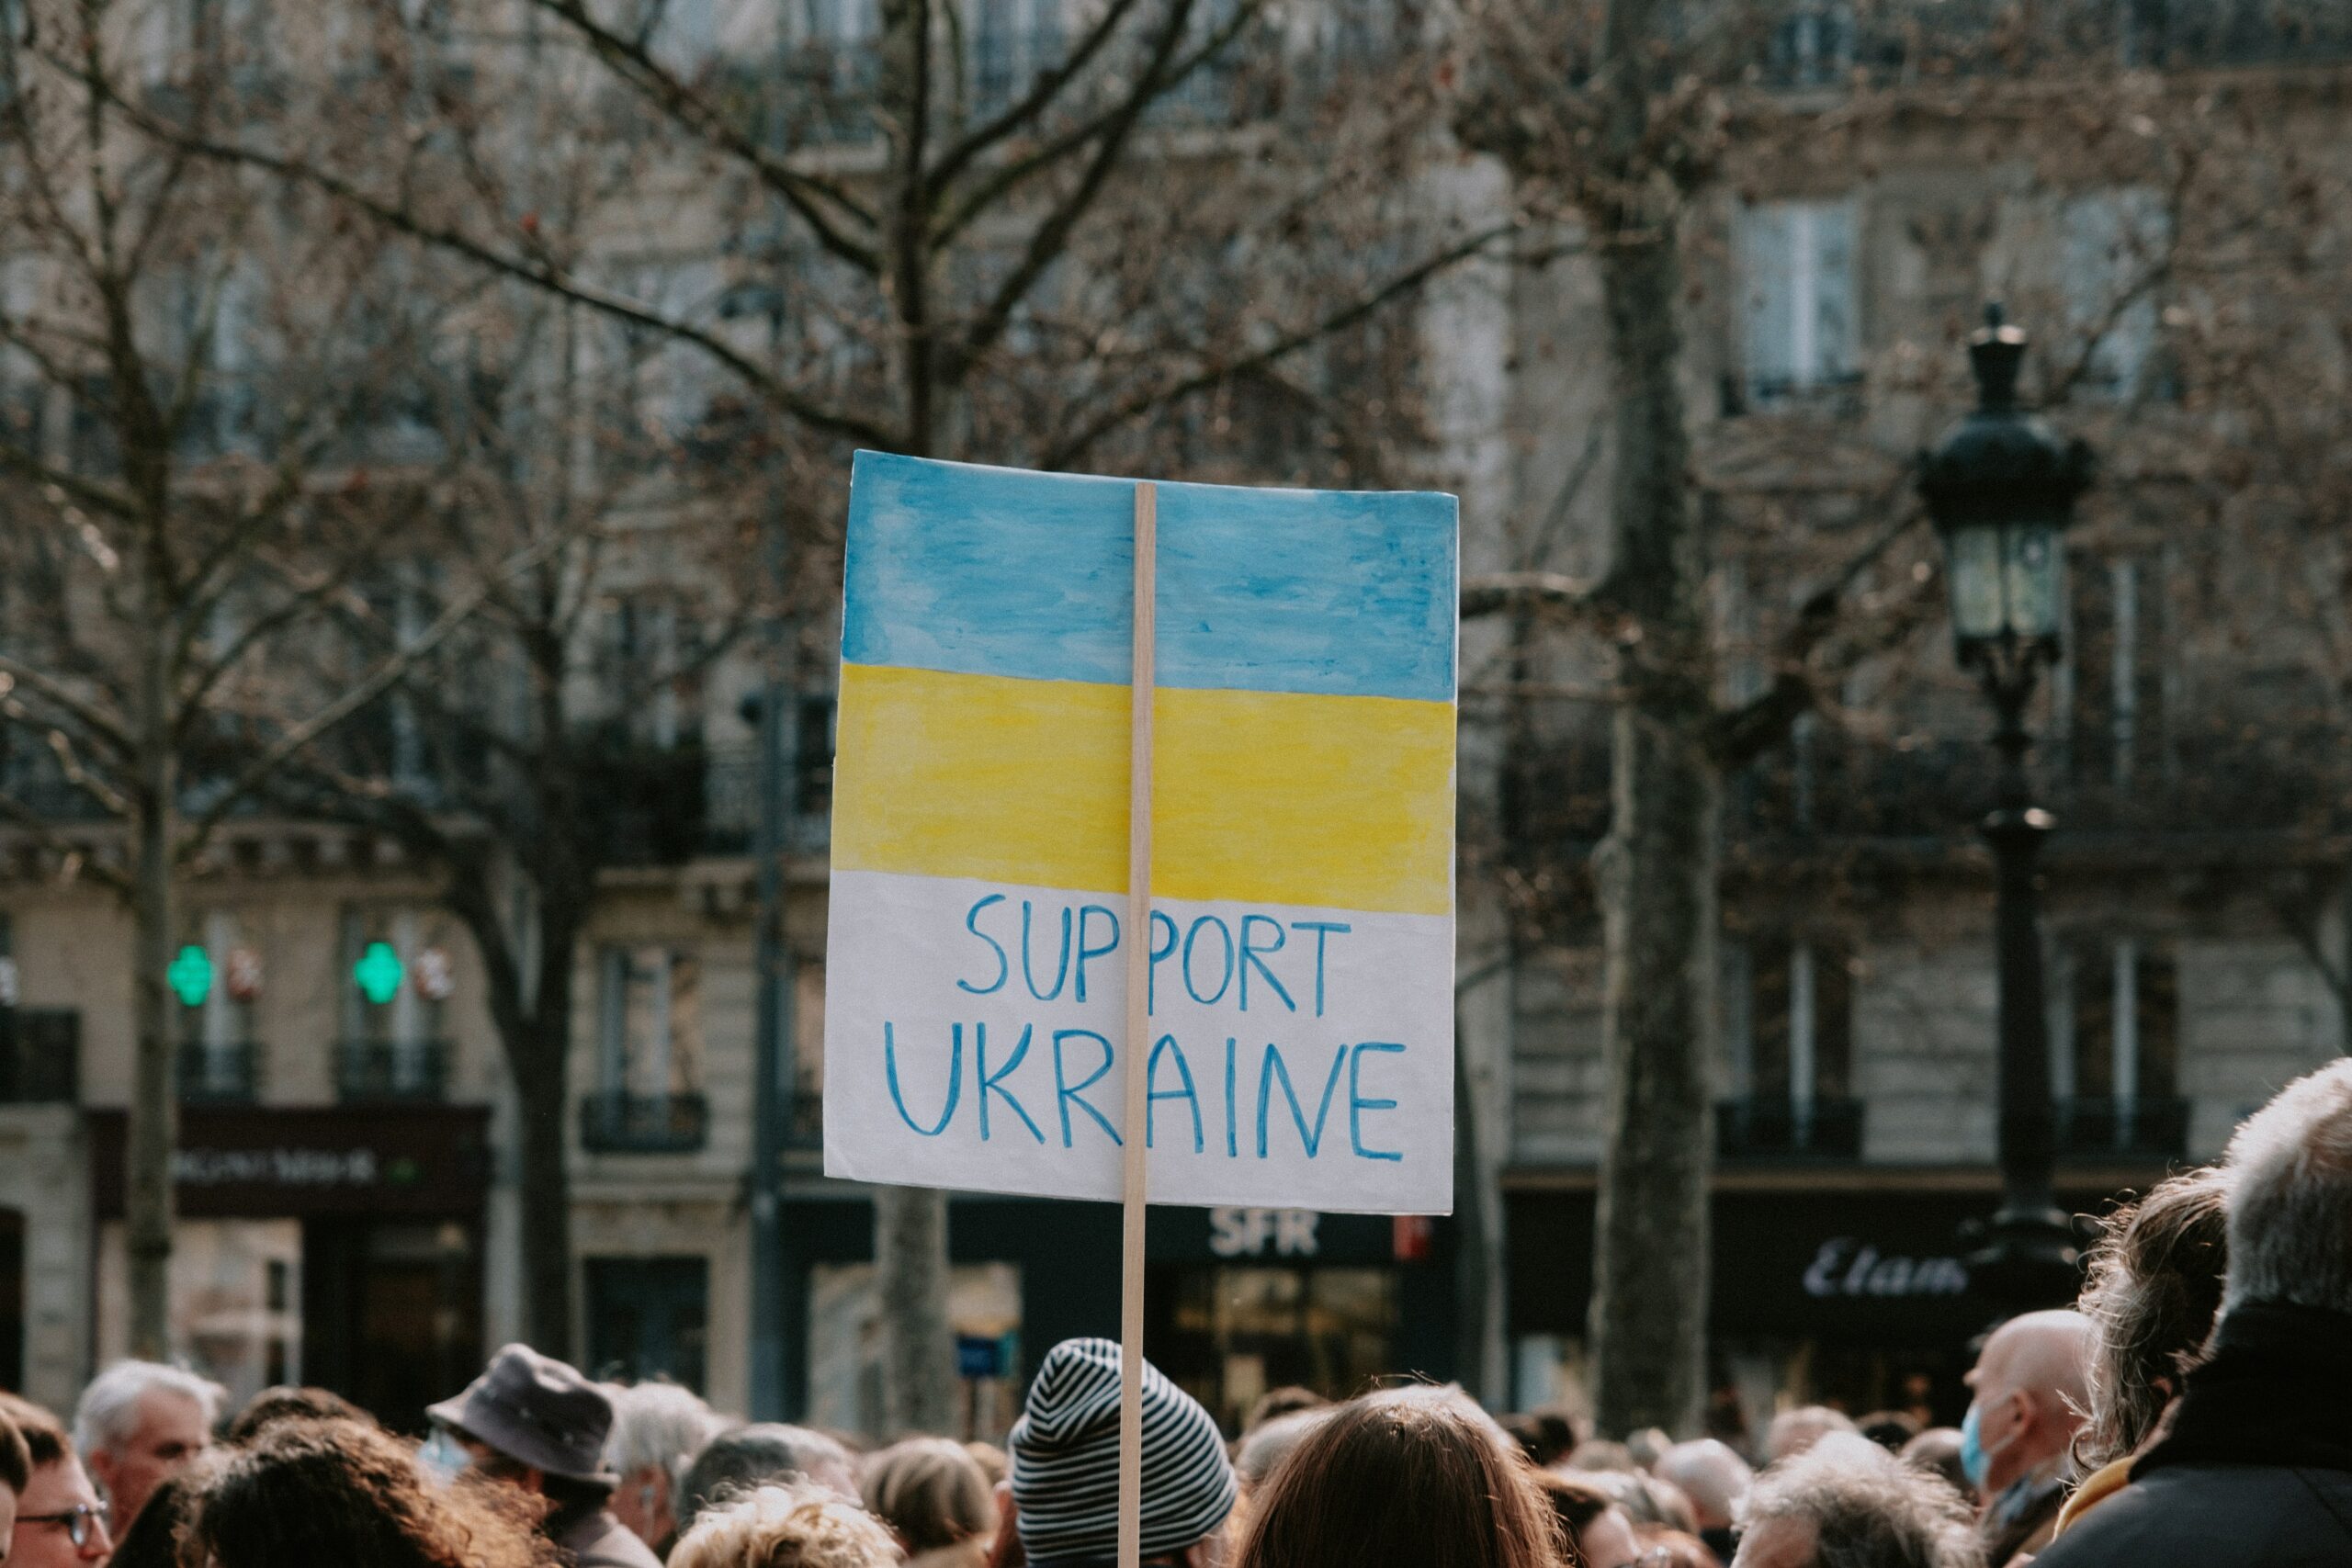 This photo is of a group of protestors. One individual is central in the photo and is holding a sign that reads “Support Ukraine.”